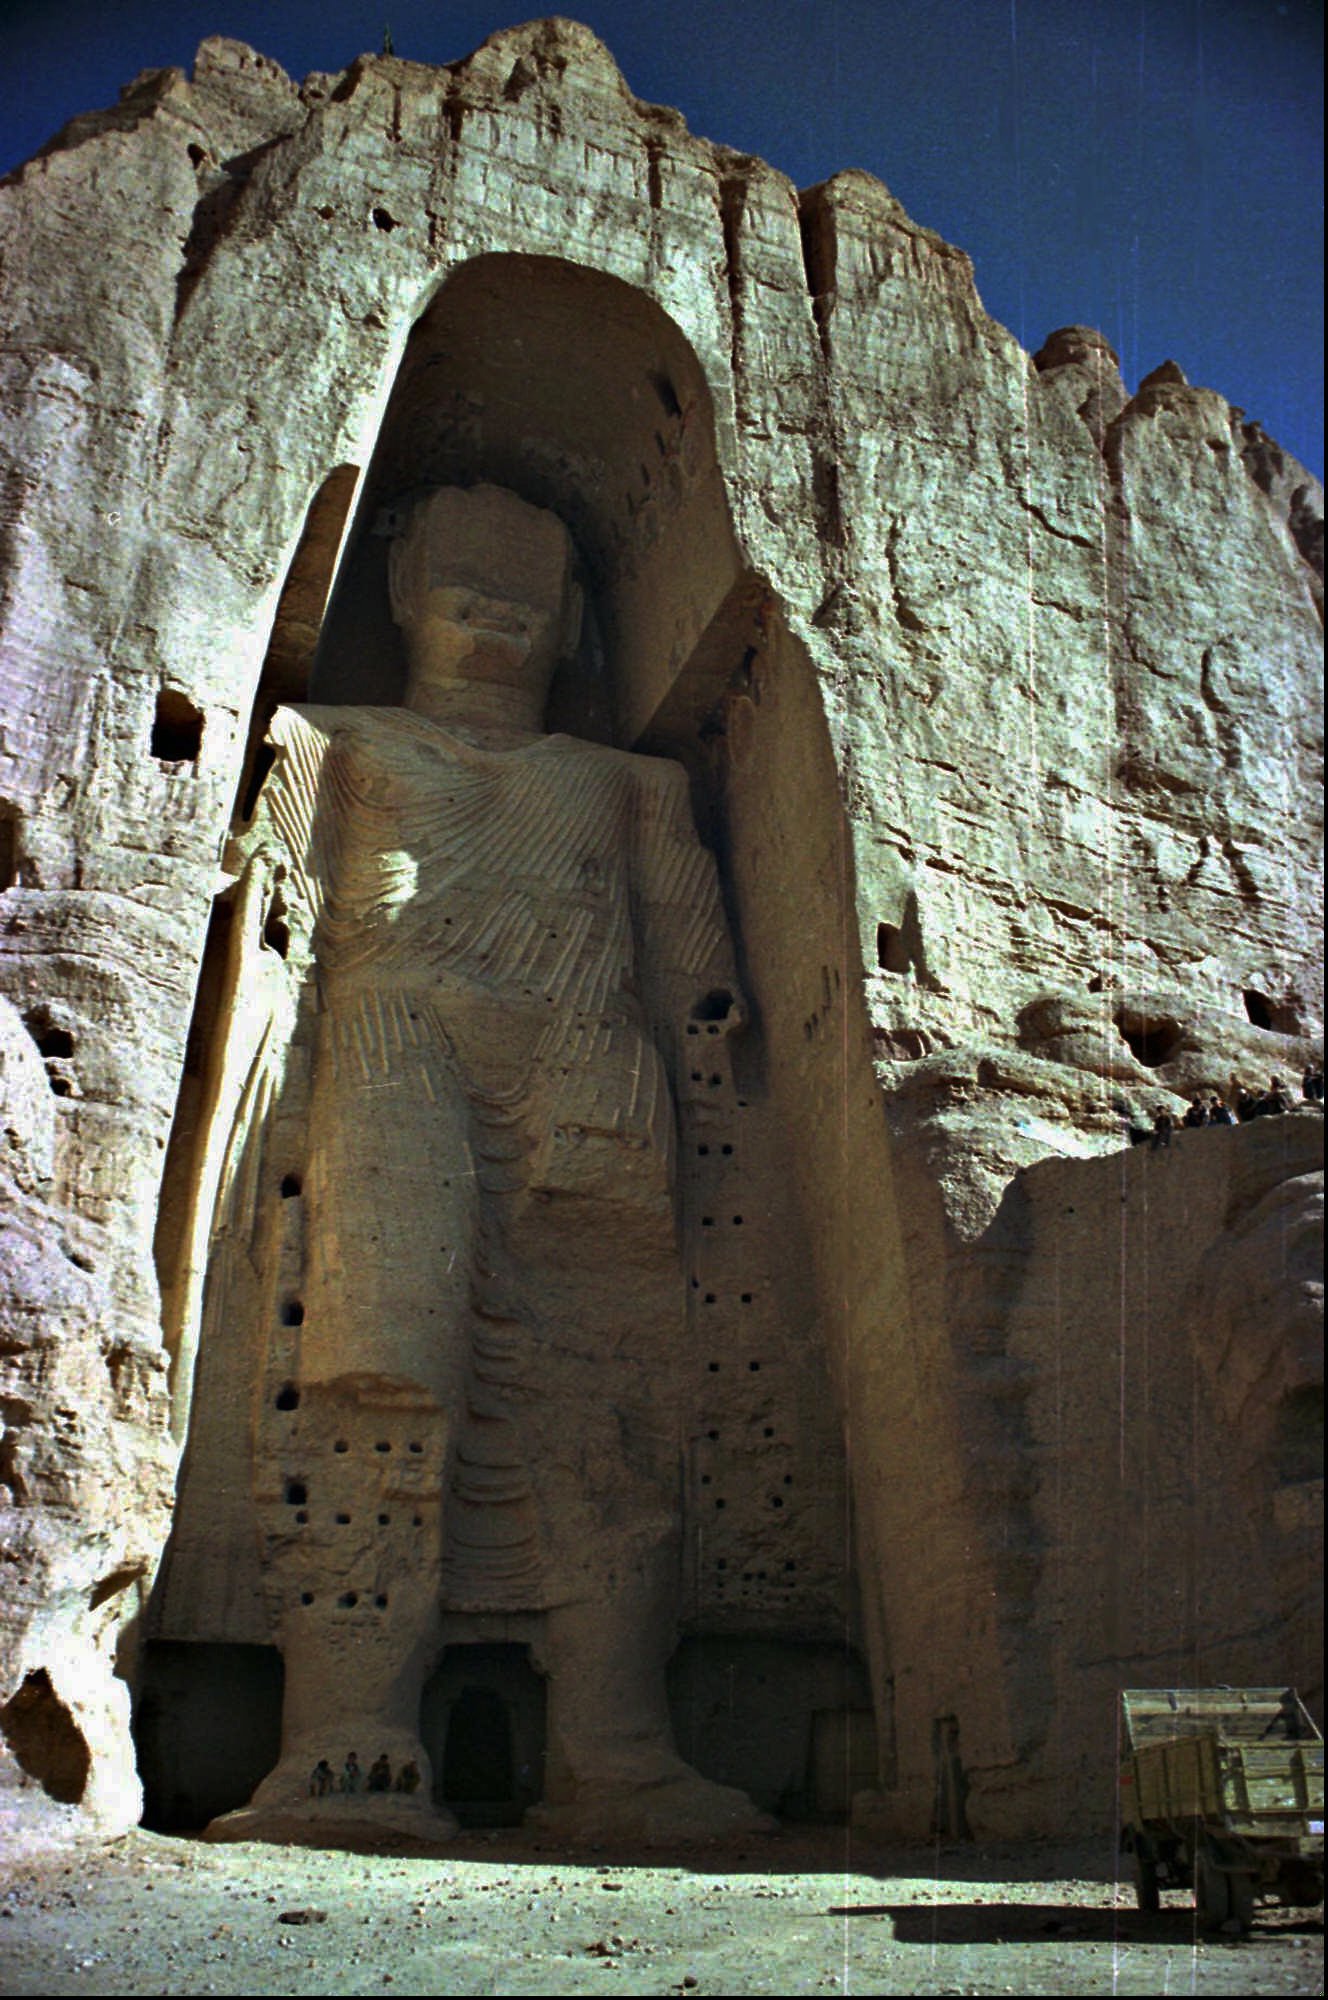 The ancient Buddhist statue before it was destroyed by the Taliban